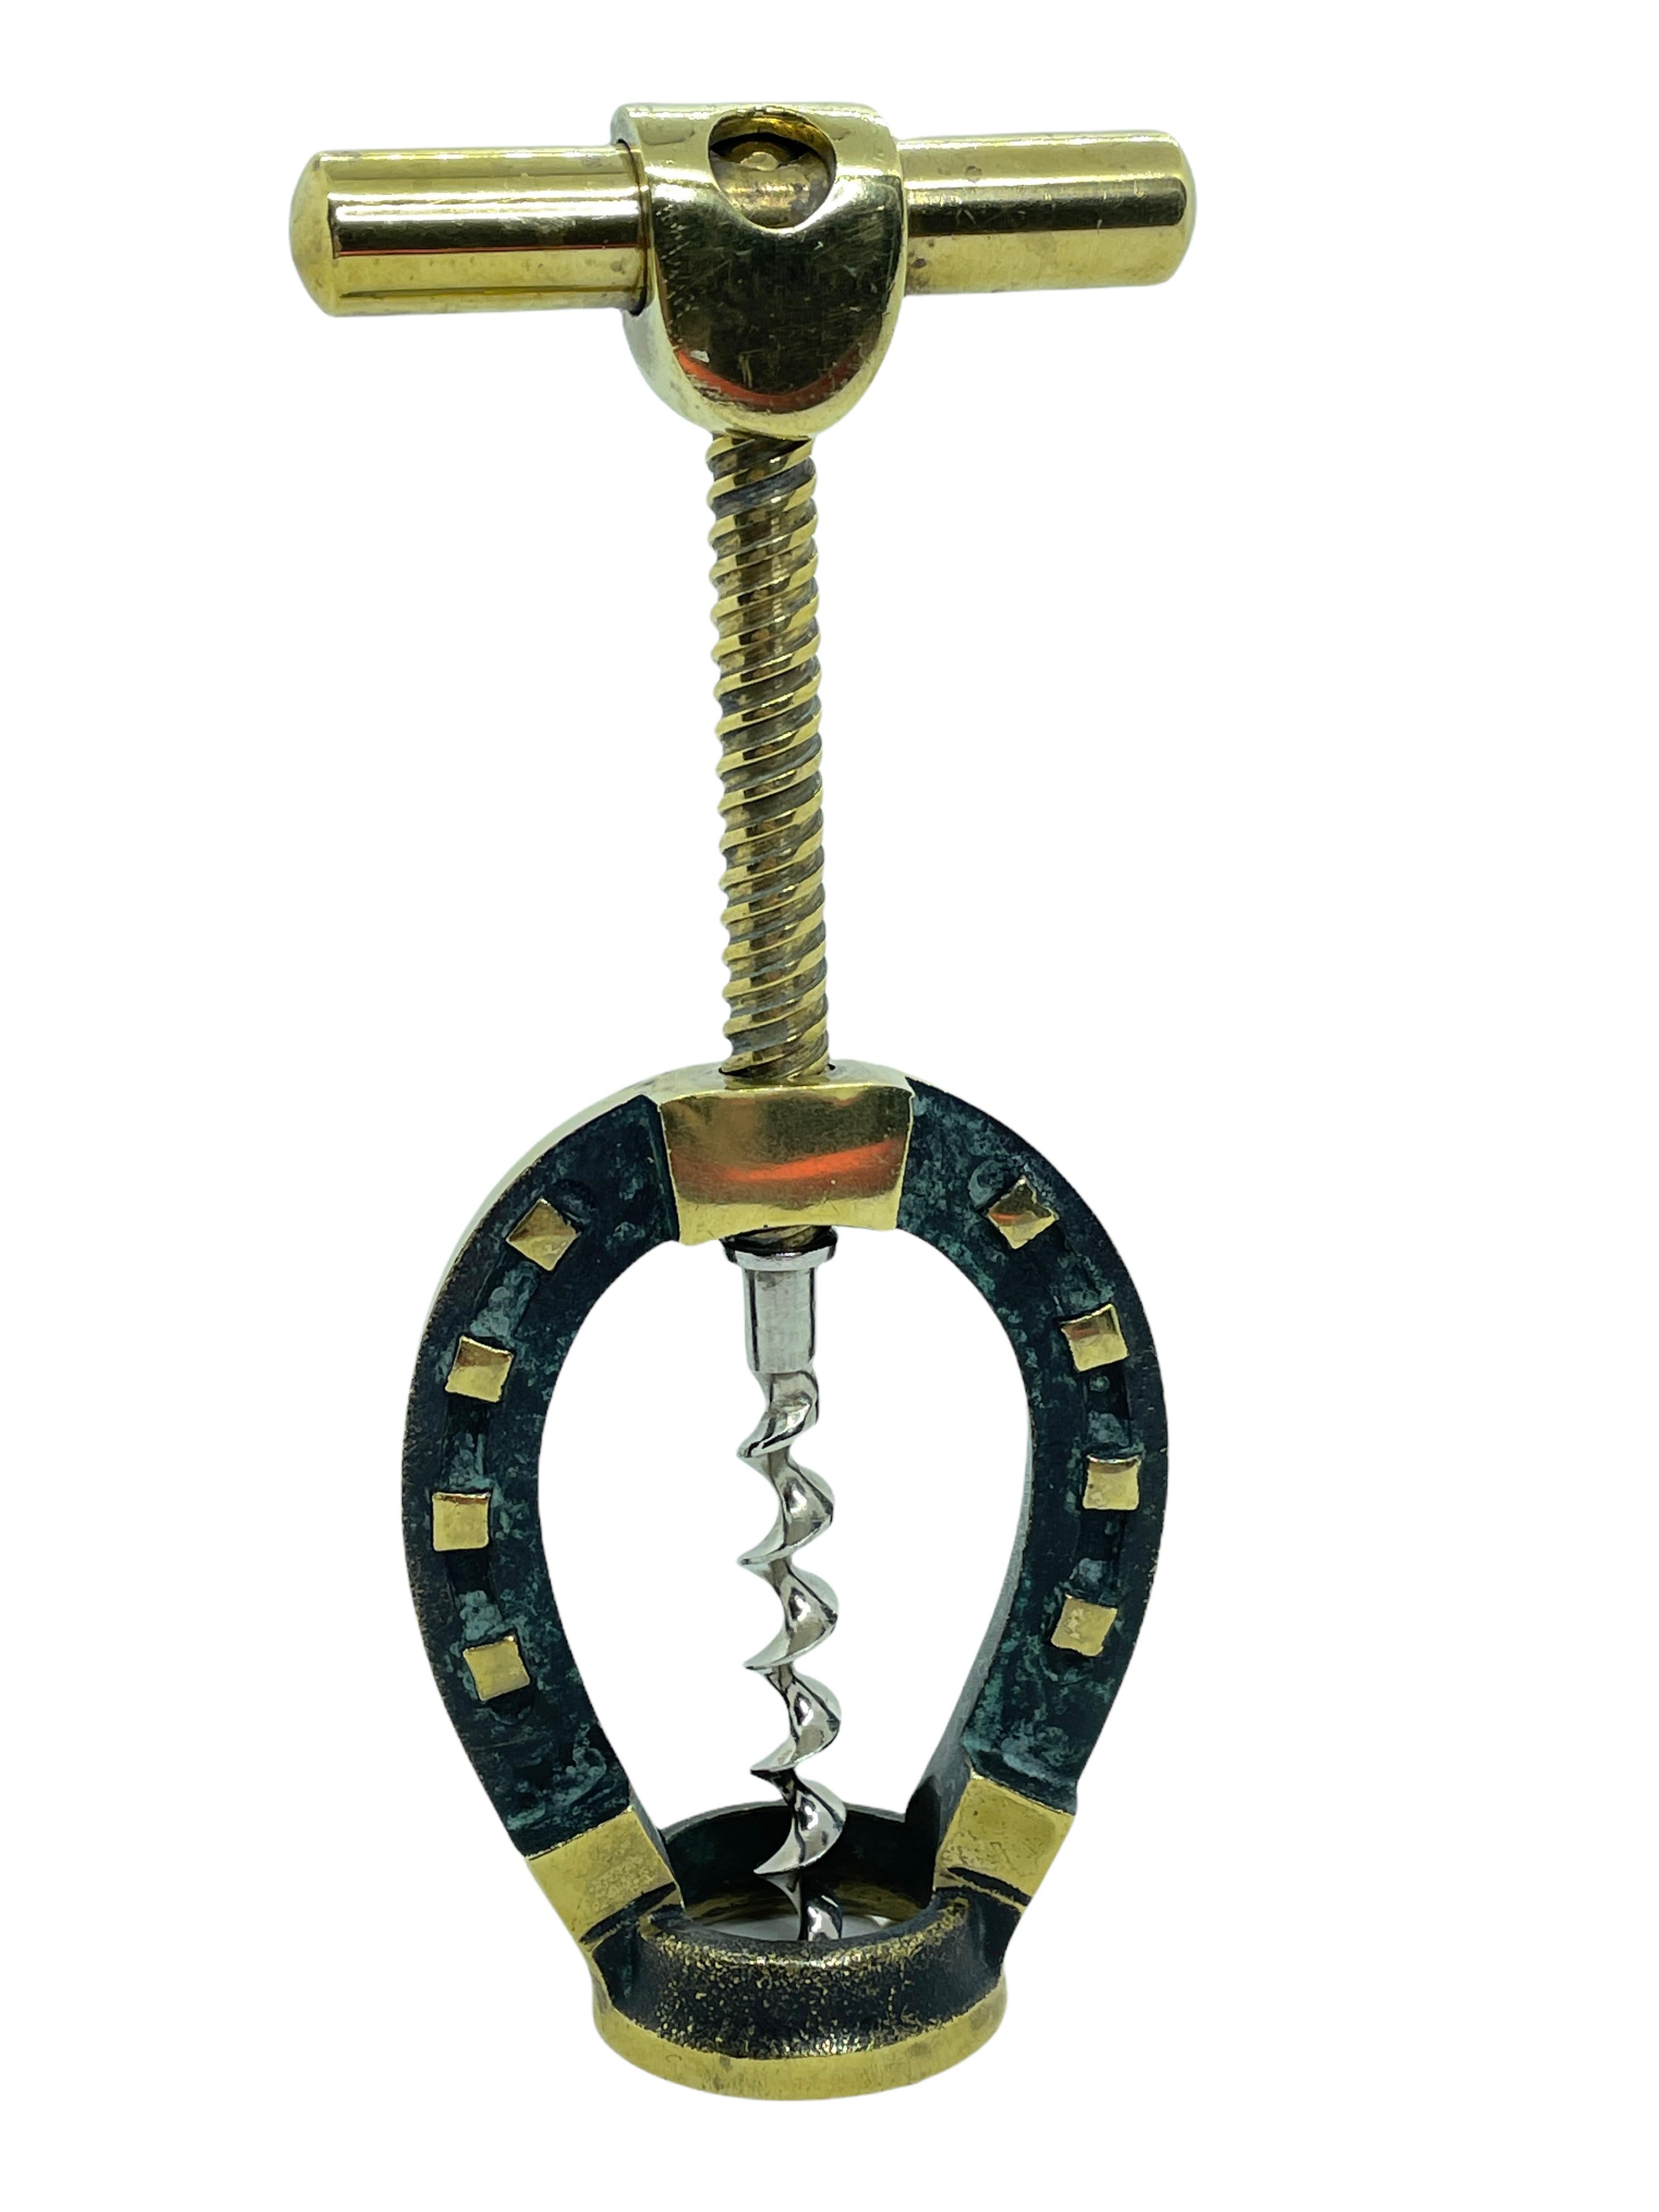 Classic early 1950s Austrian Walter Bosse design corkscrew in the form of a horseshoe. Nice addition to your room or just for your collection of Austrian bronze items. Found at an estate sale in Vienna, Austria.